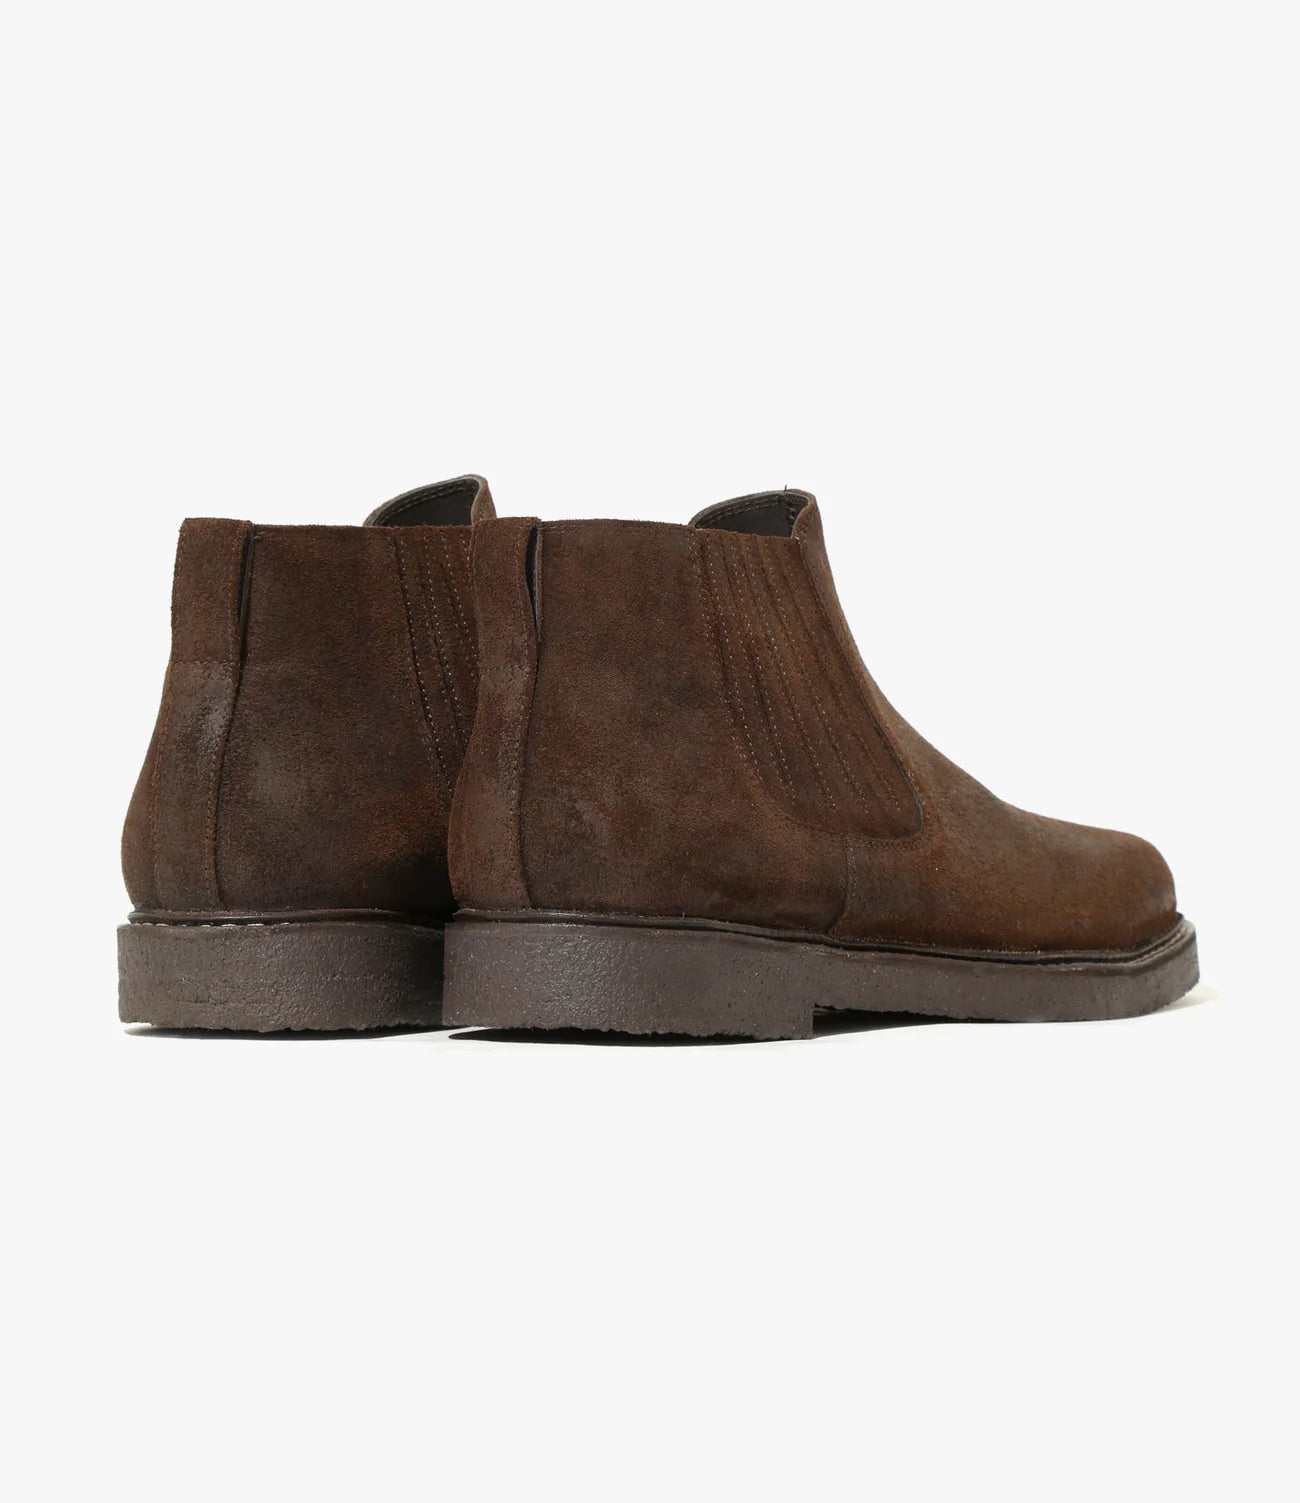 Needles Norwegian Welt Chelsea Boot - Brown Rough Out